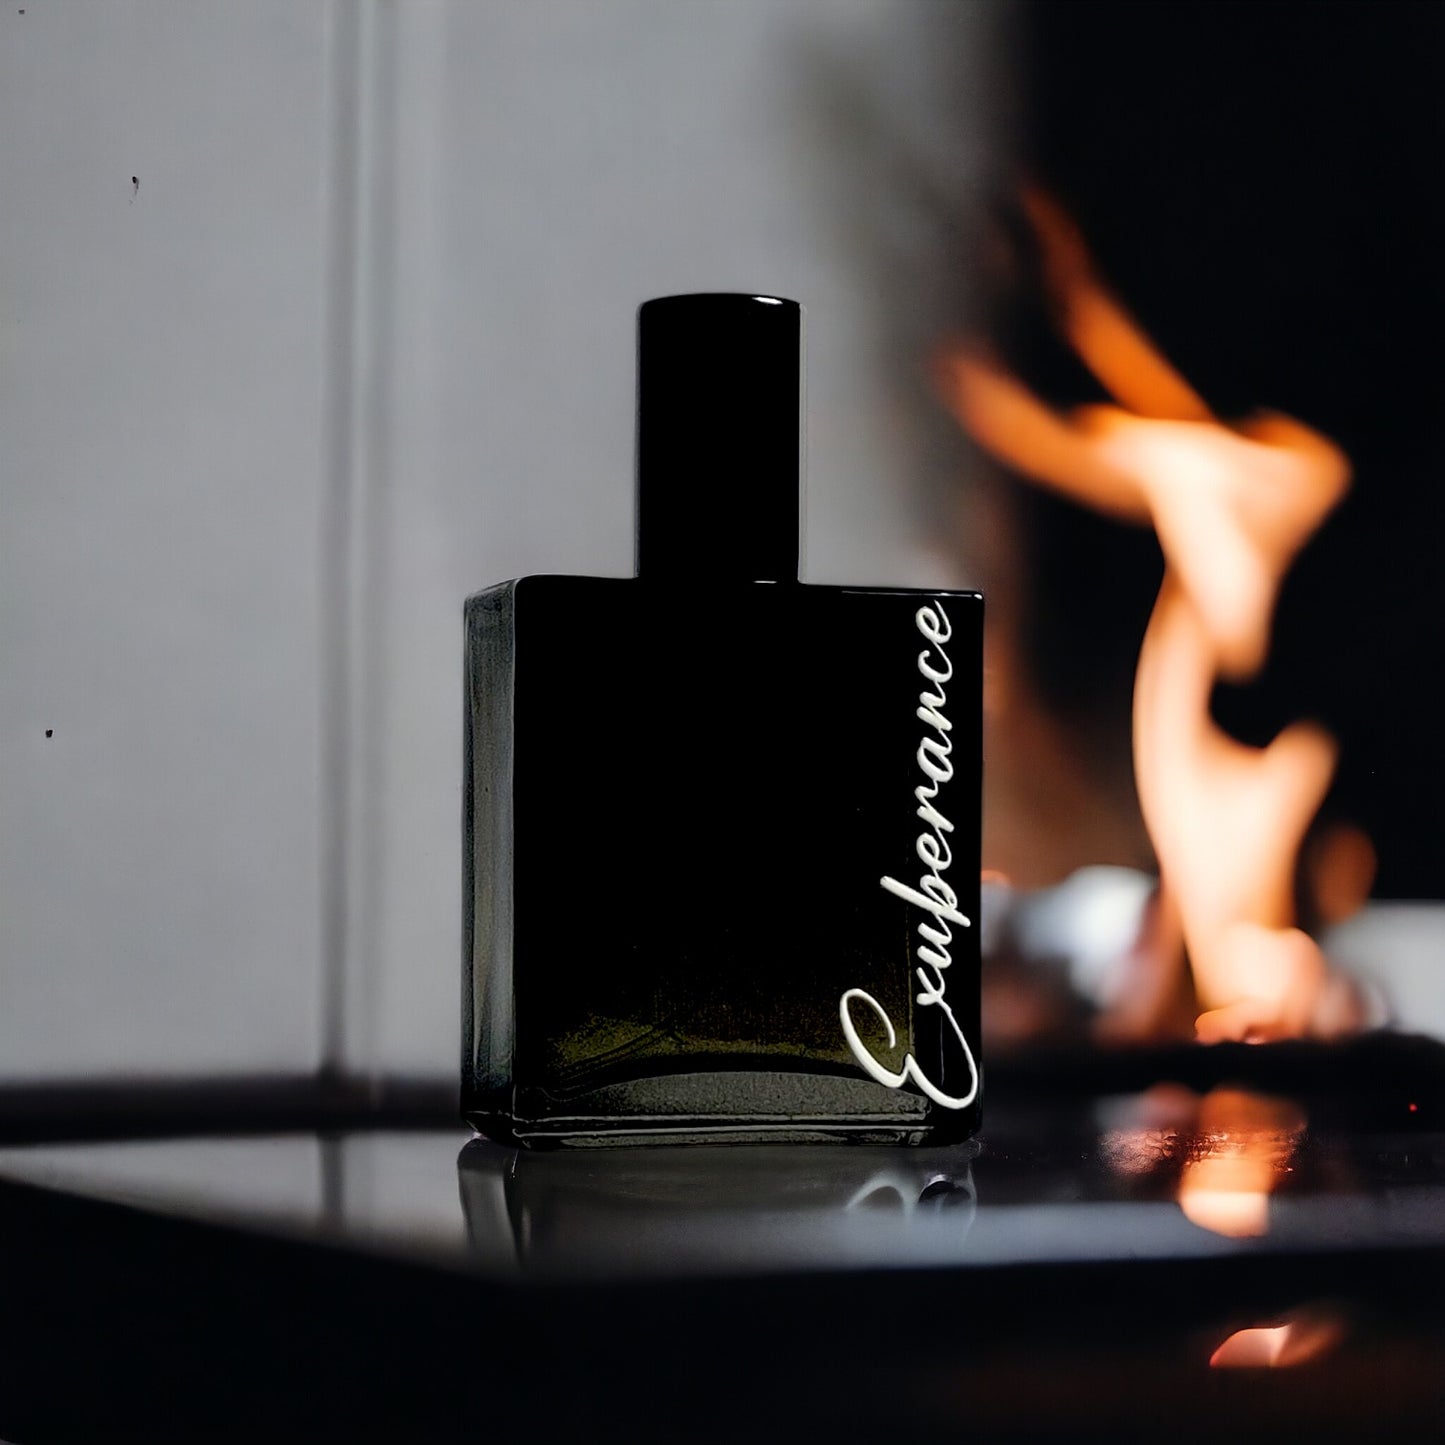 Exuberance - 50ml | Nearest Match to Spice Bomb Extreme by Viktor & Rolf | Scent You